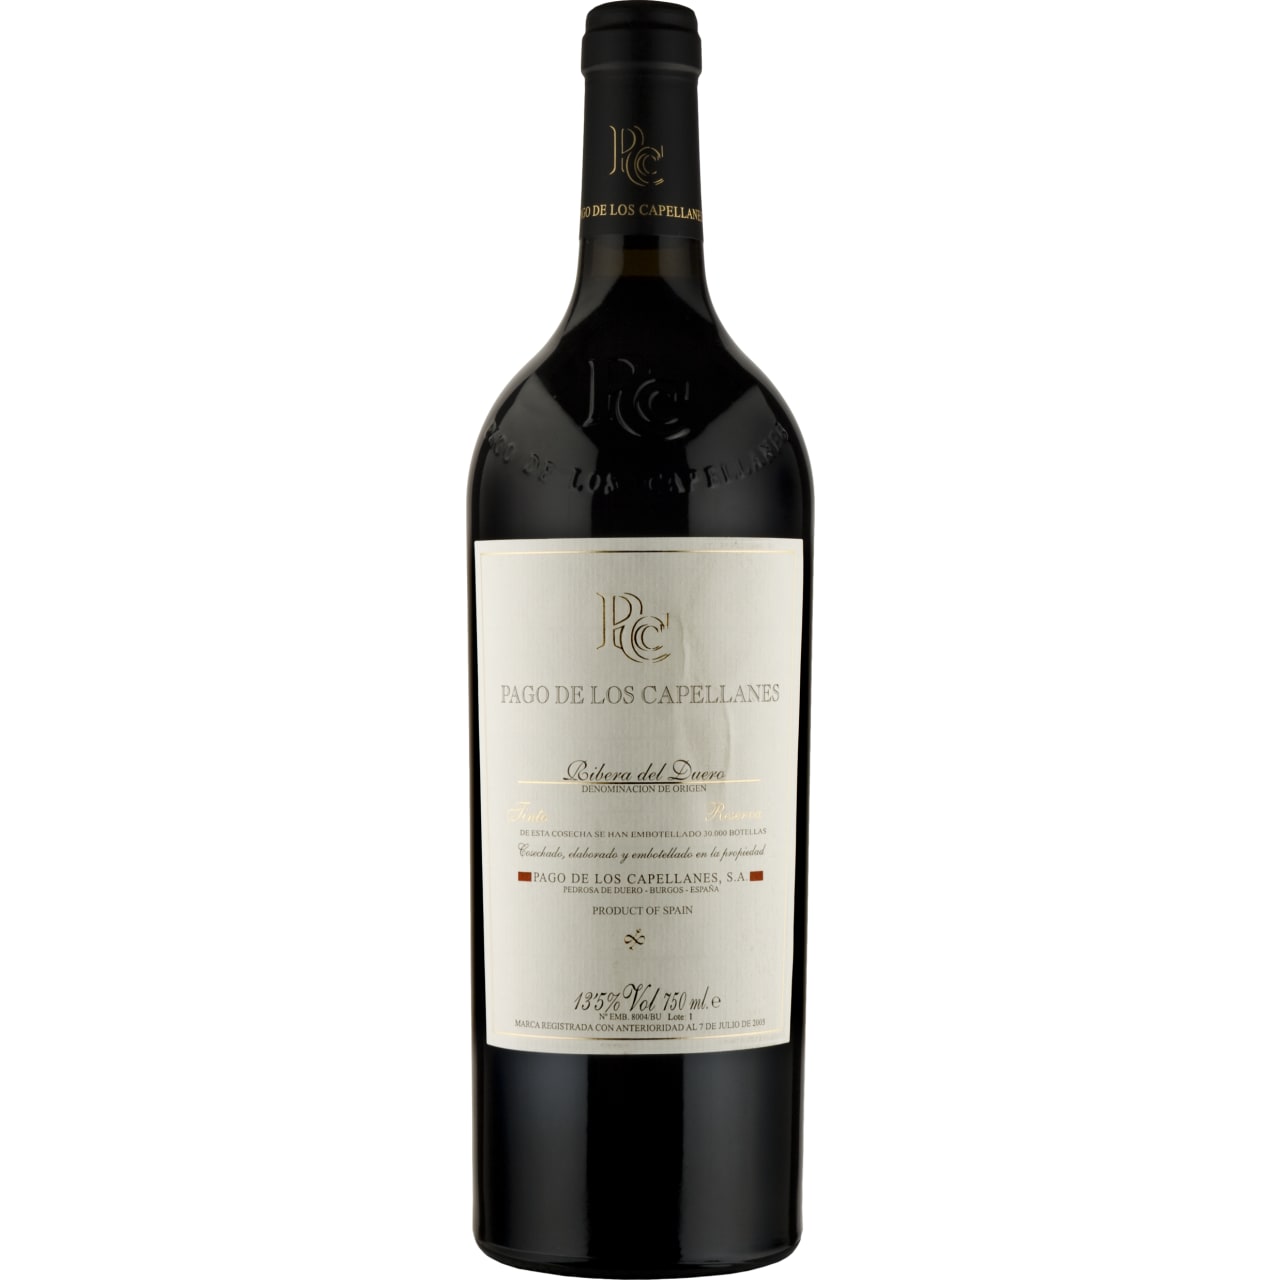 Displays great balance with glossy, mature tannins and an elegant fruit character.